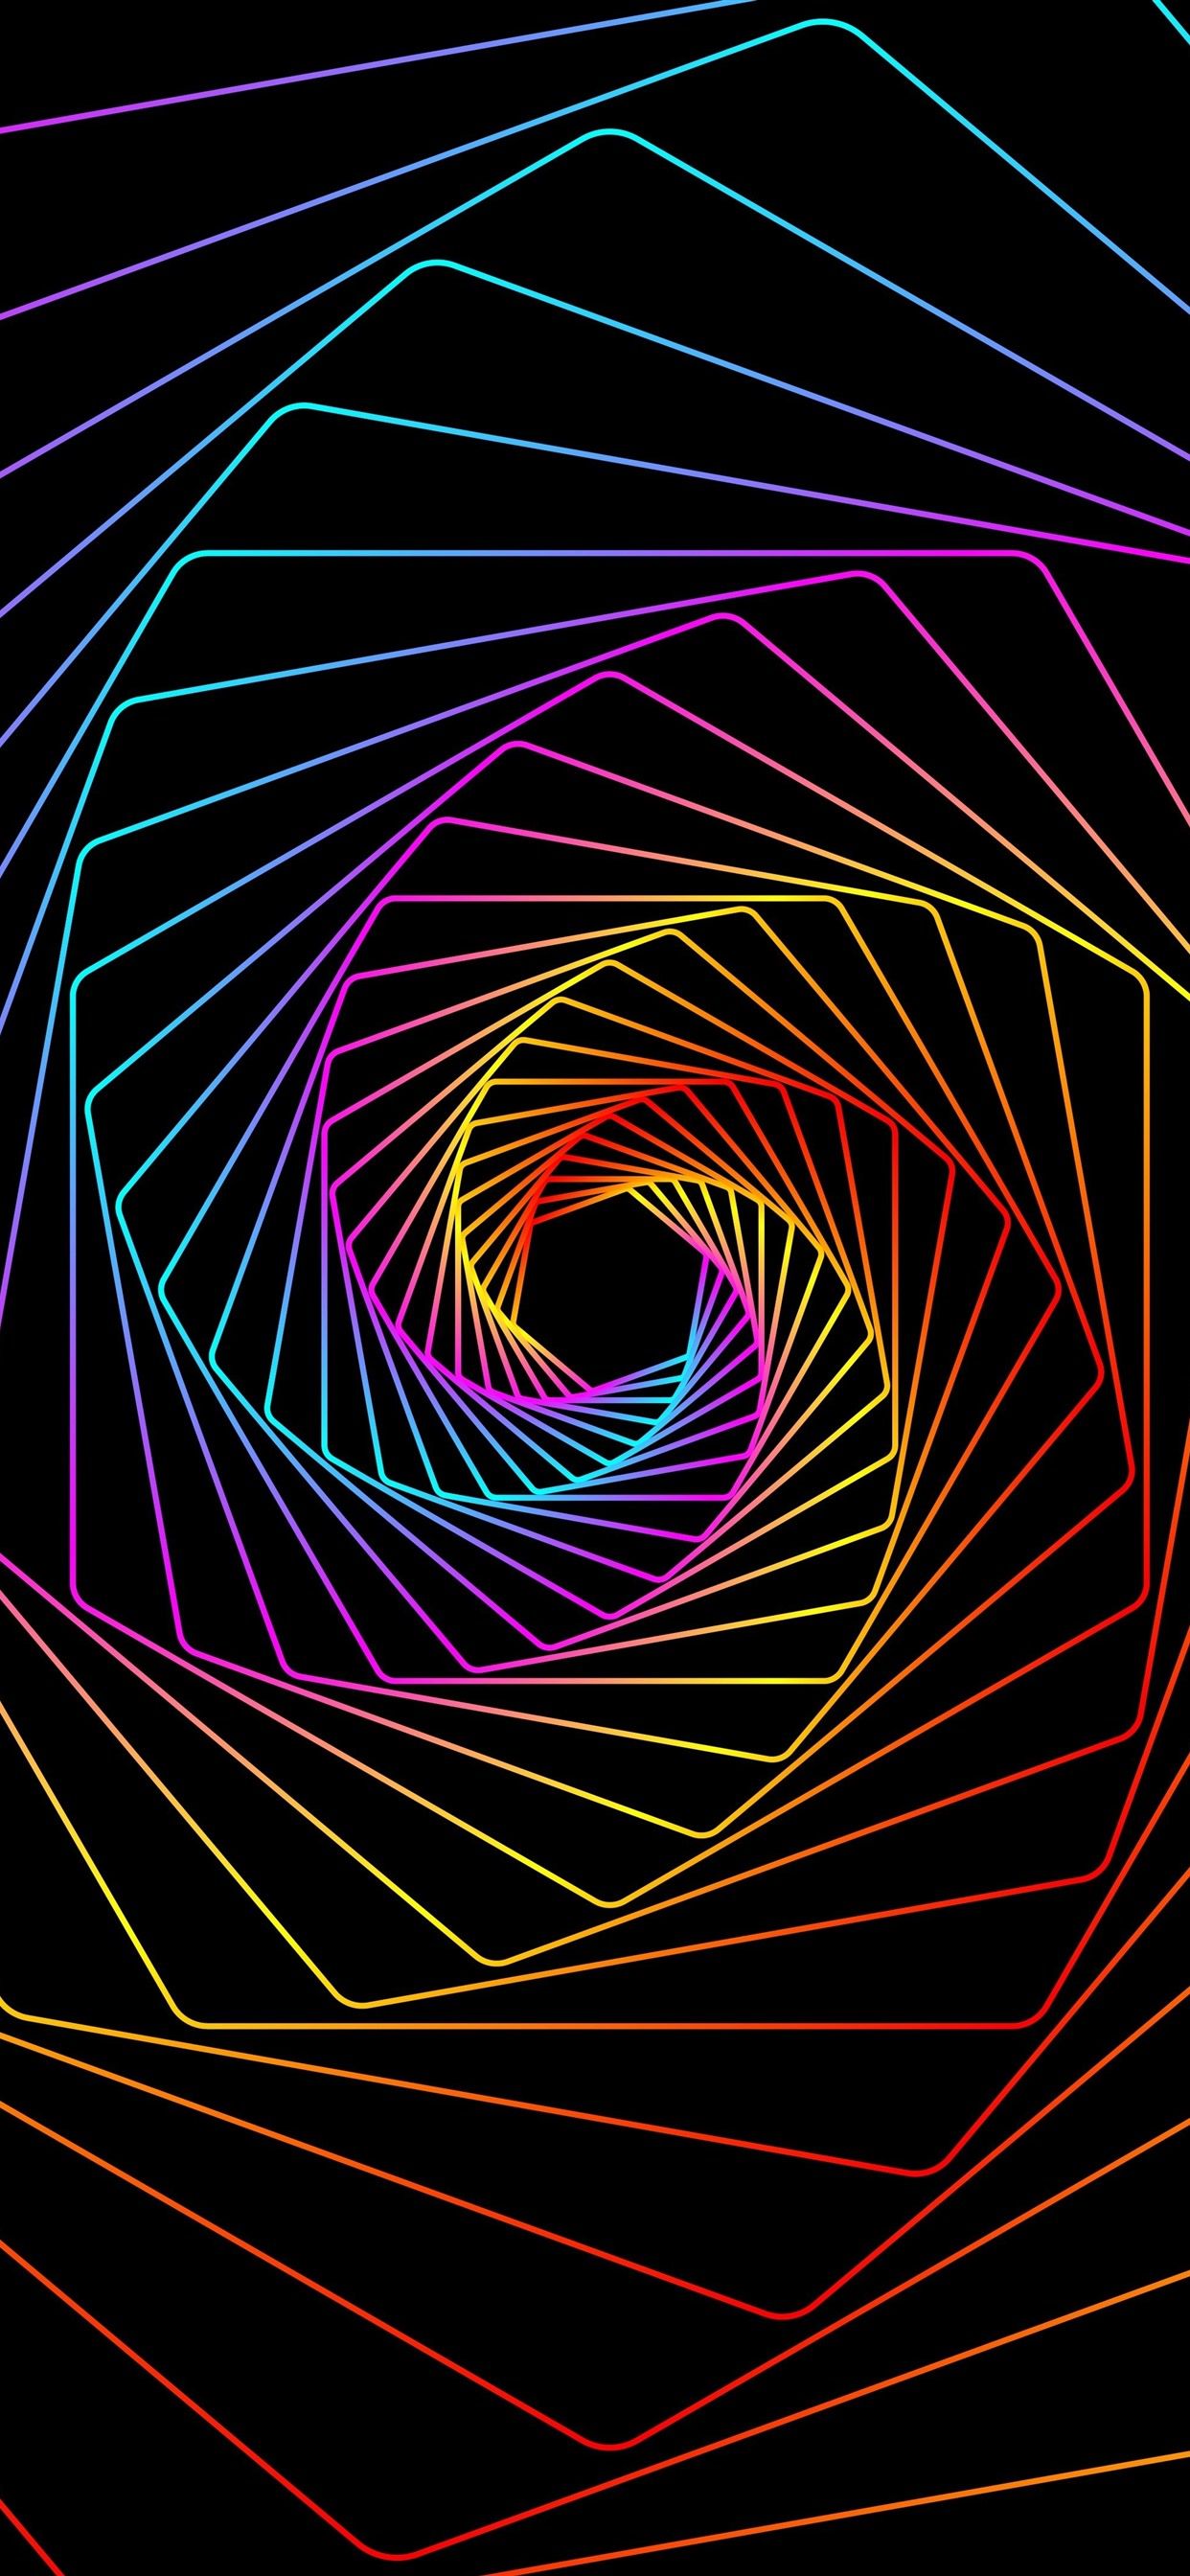 Spiral, Rainbow Lines, Black Background, Abstract 1242x2688 IPhone 11 Pro XS Max Wallpaper, Background, Picture, Image